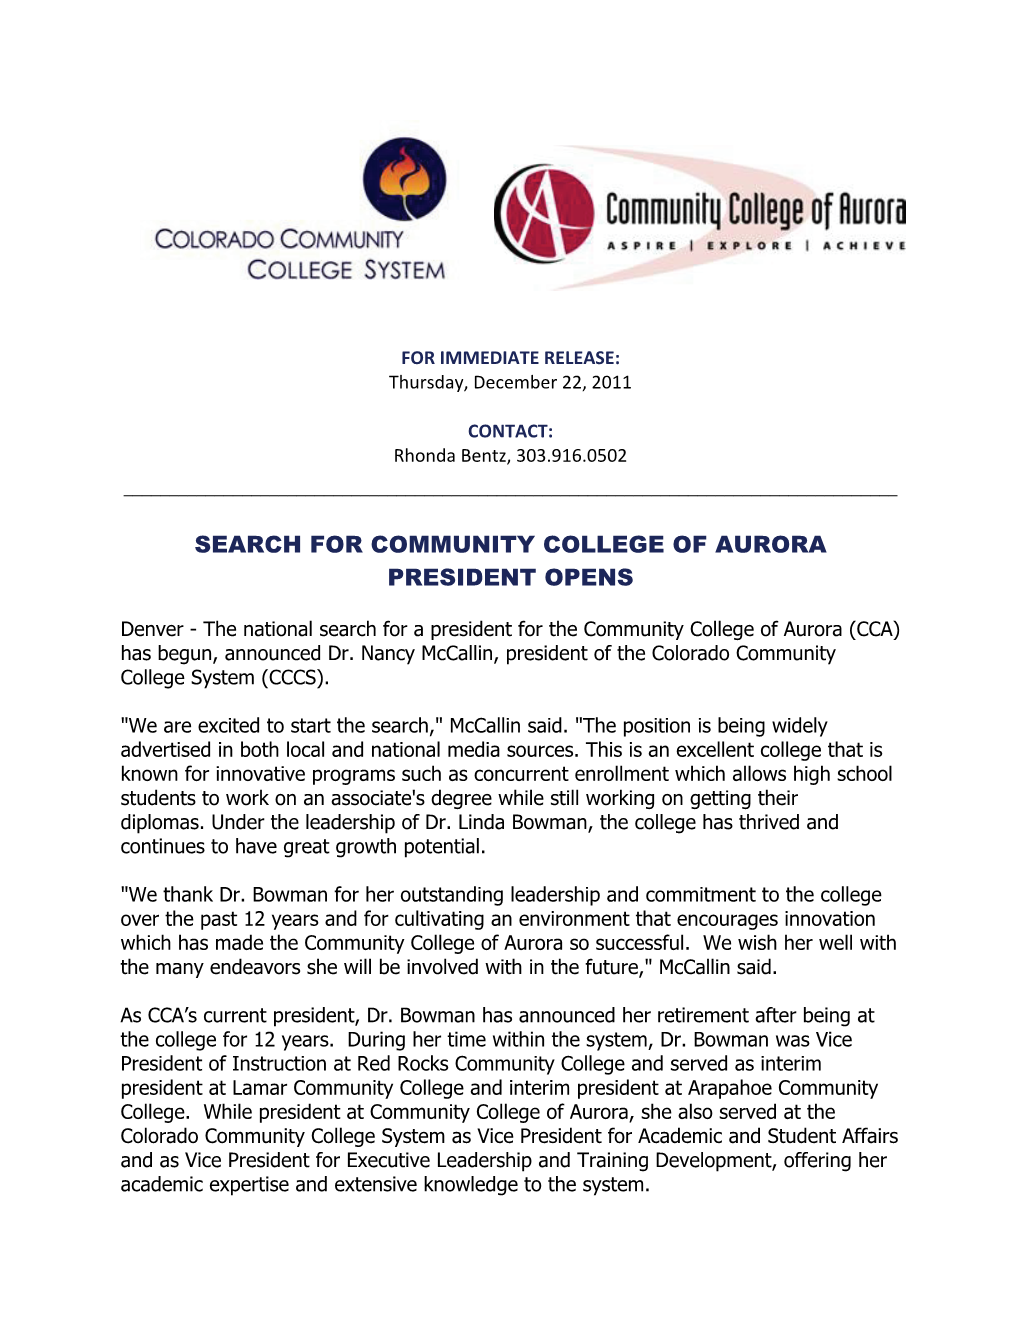 Search for Community College of Aurora President Opens